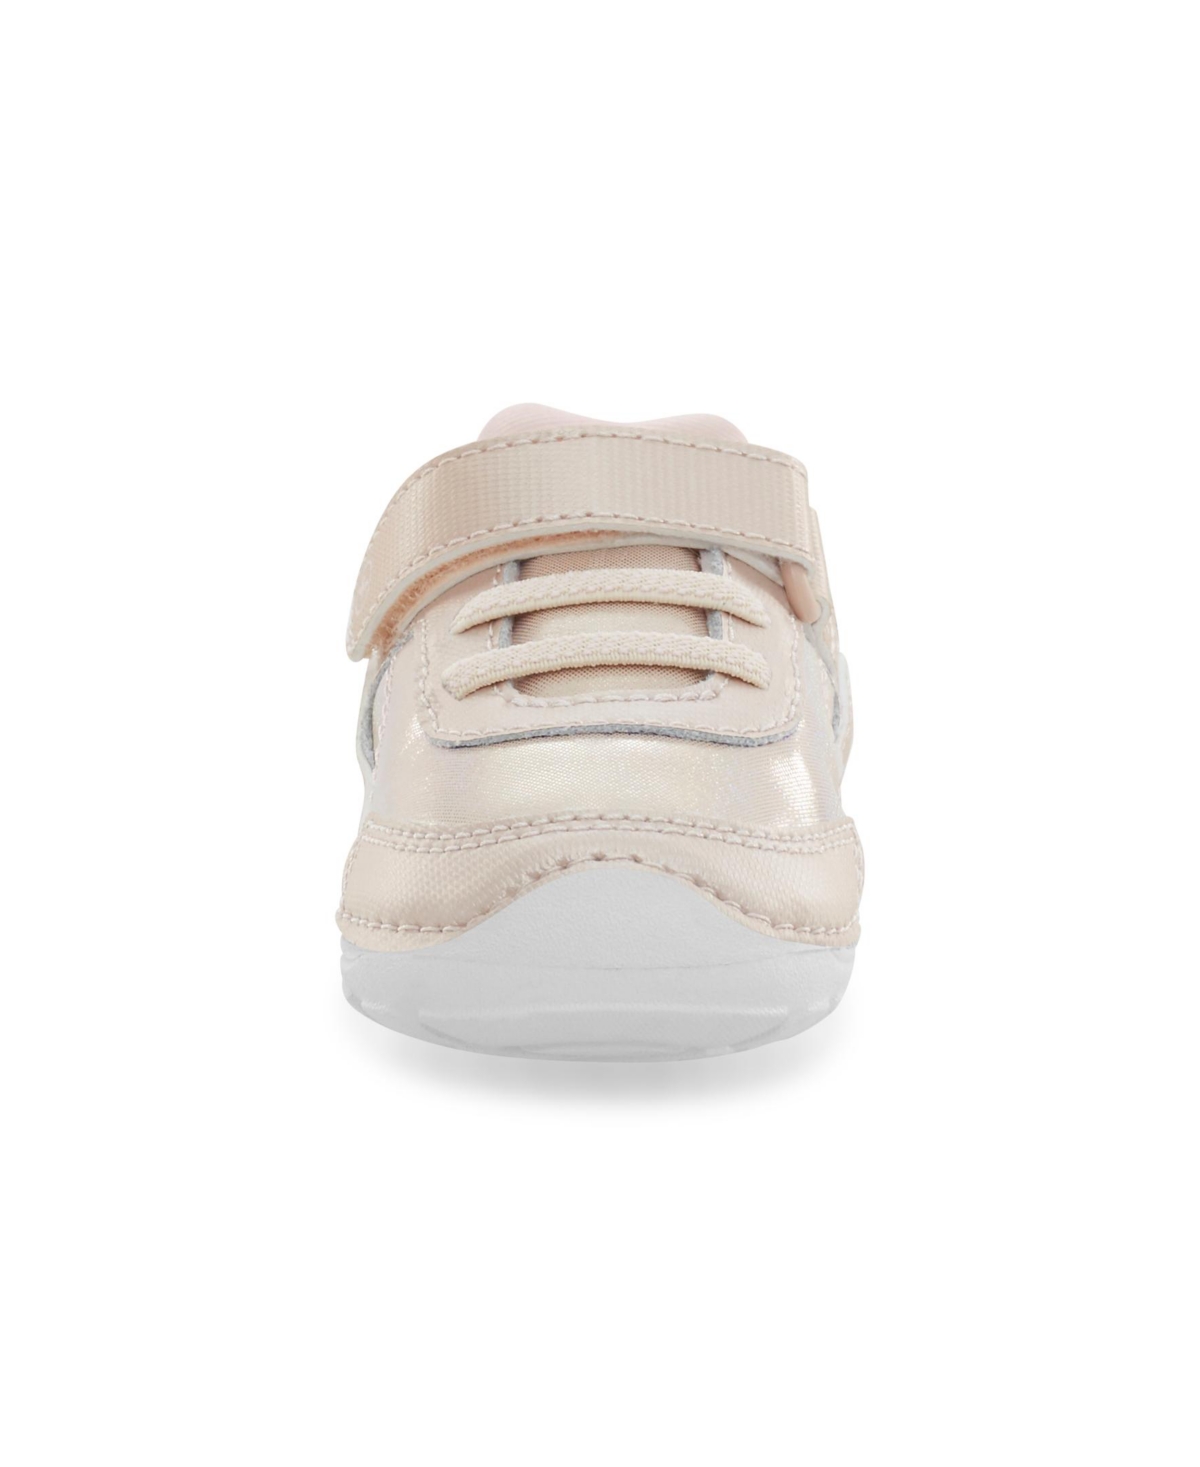 Shop Stride Rite Little Boys Sm Grover Apma Approved Shoe In Champagne